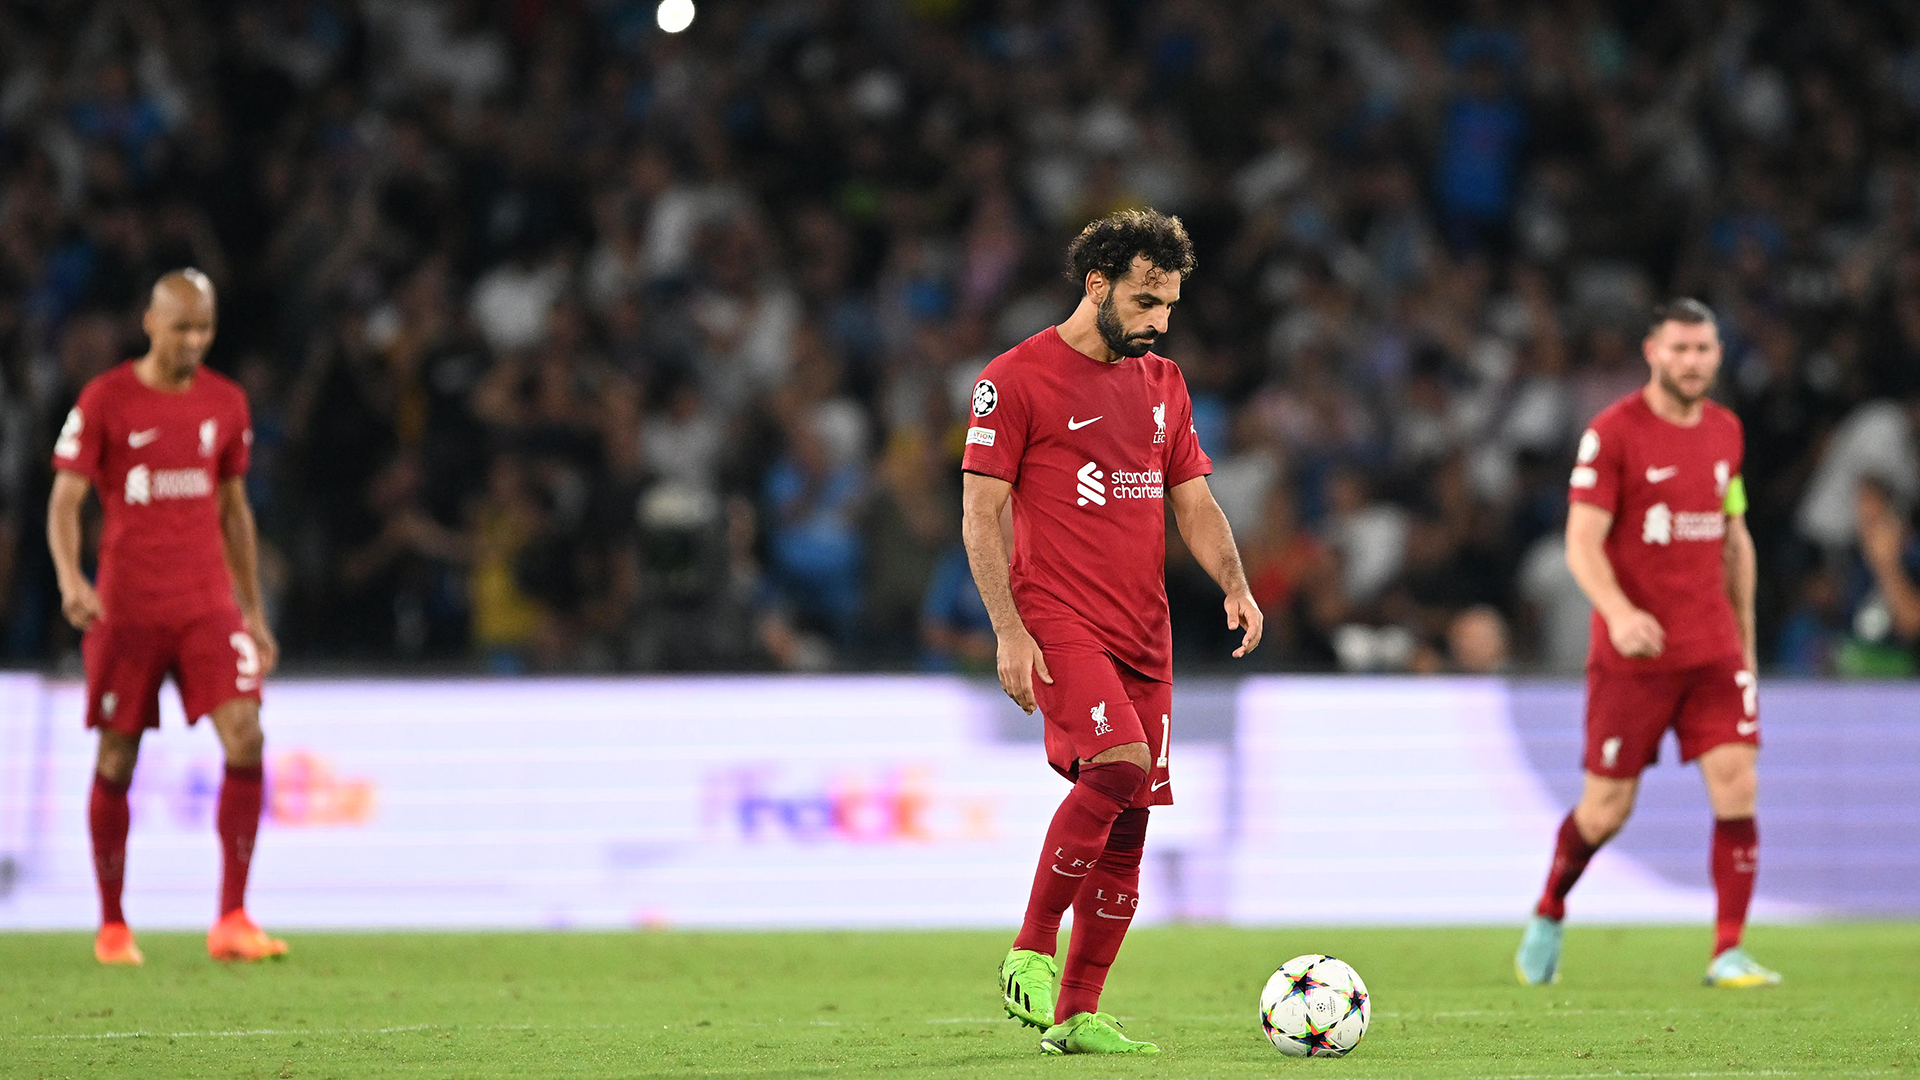 Mohamed Salah of Liverpool looks dejected after Piotr Zielinski (not pictured) of SSC Napoli scores their team's fourth goal during the UEFA Champions League group A match between SSC Napoli and Liverpool FC at Stadio Diego Armando Maradona on September 07, 2022 in Naples, Italy.